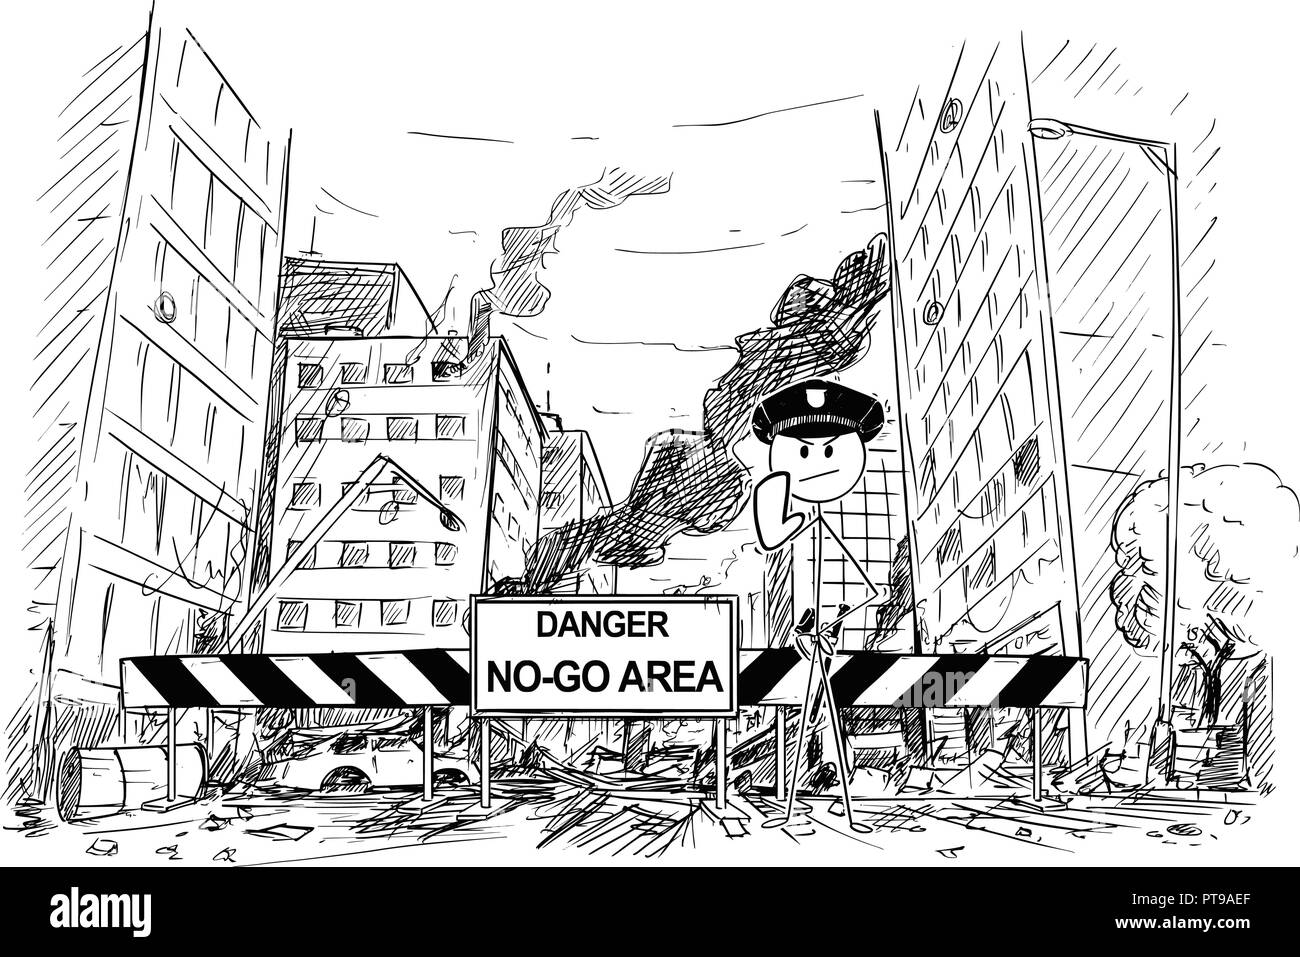 Hand Drawing of City Street Destroyed by Riot, Road Blocked by Danger No-Go Area Sign and Policemen Stock Vector